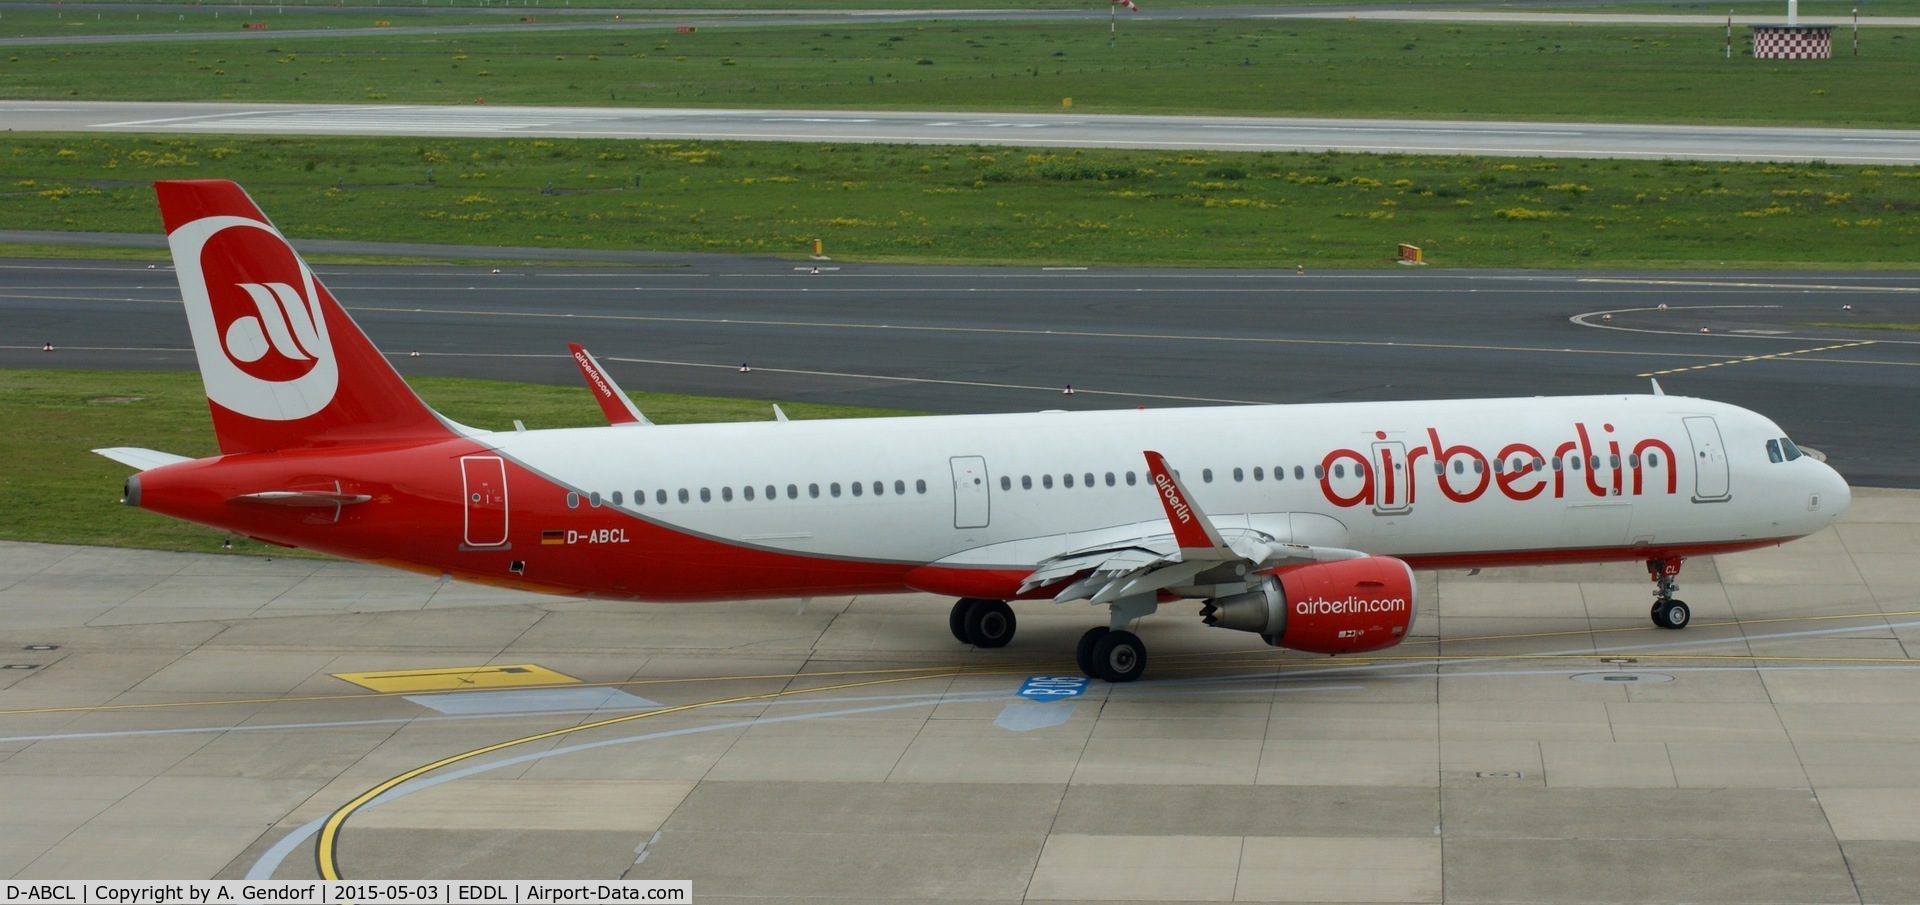 D-ABCL, 2014 Airbus A321-211 C/N 6168, Air Berlin, is here taxiing to the runway for departure at Düsseldorf Int'l(EDDL)